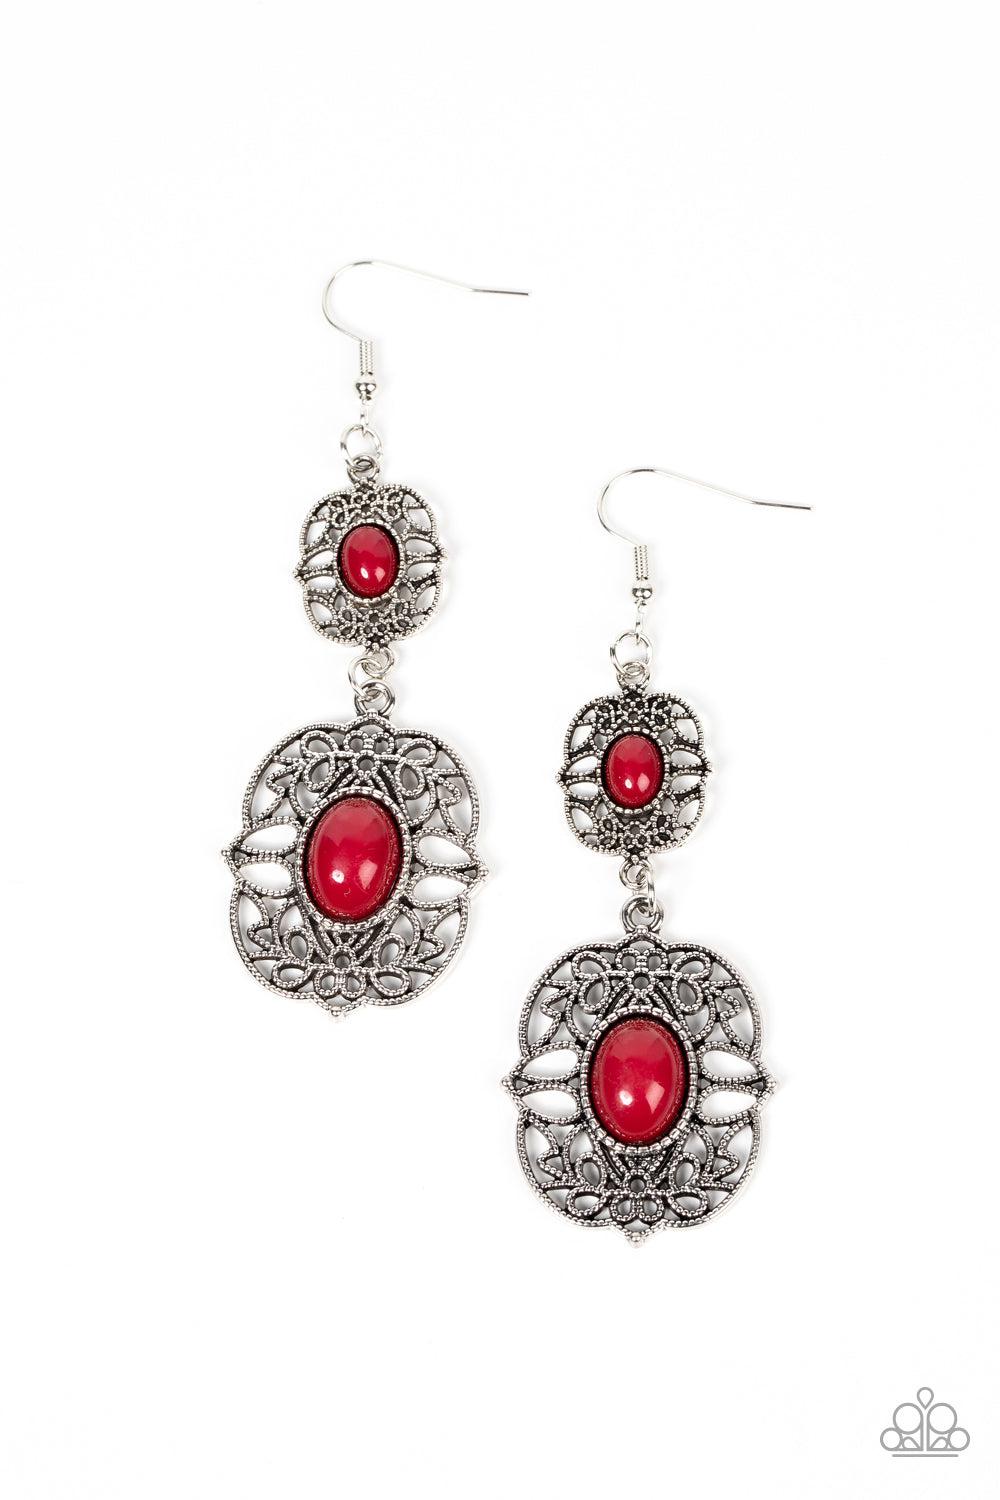 Victorian Villa Red Earrings - Paparazzi Accessories- lightbox - CarasShop.com - $5 Jewelry by Cara Jewels